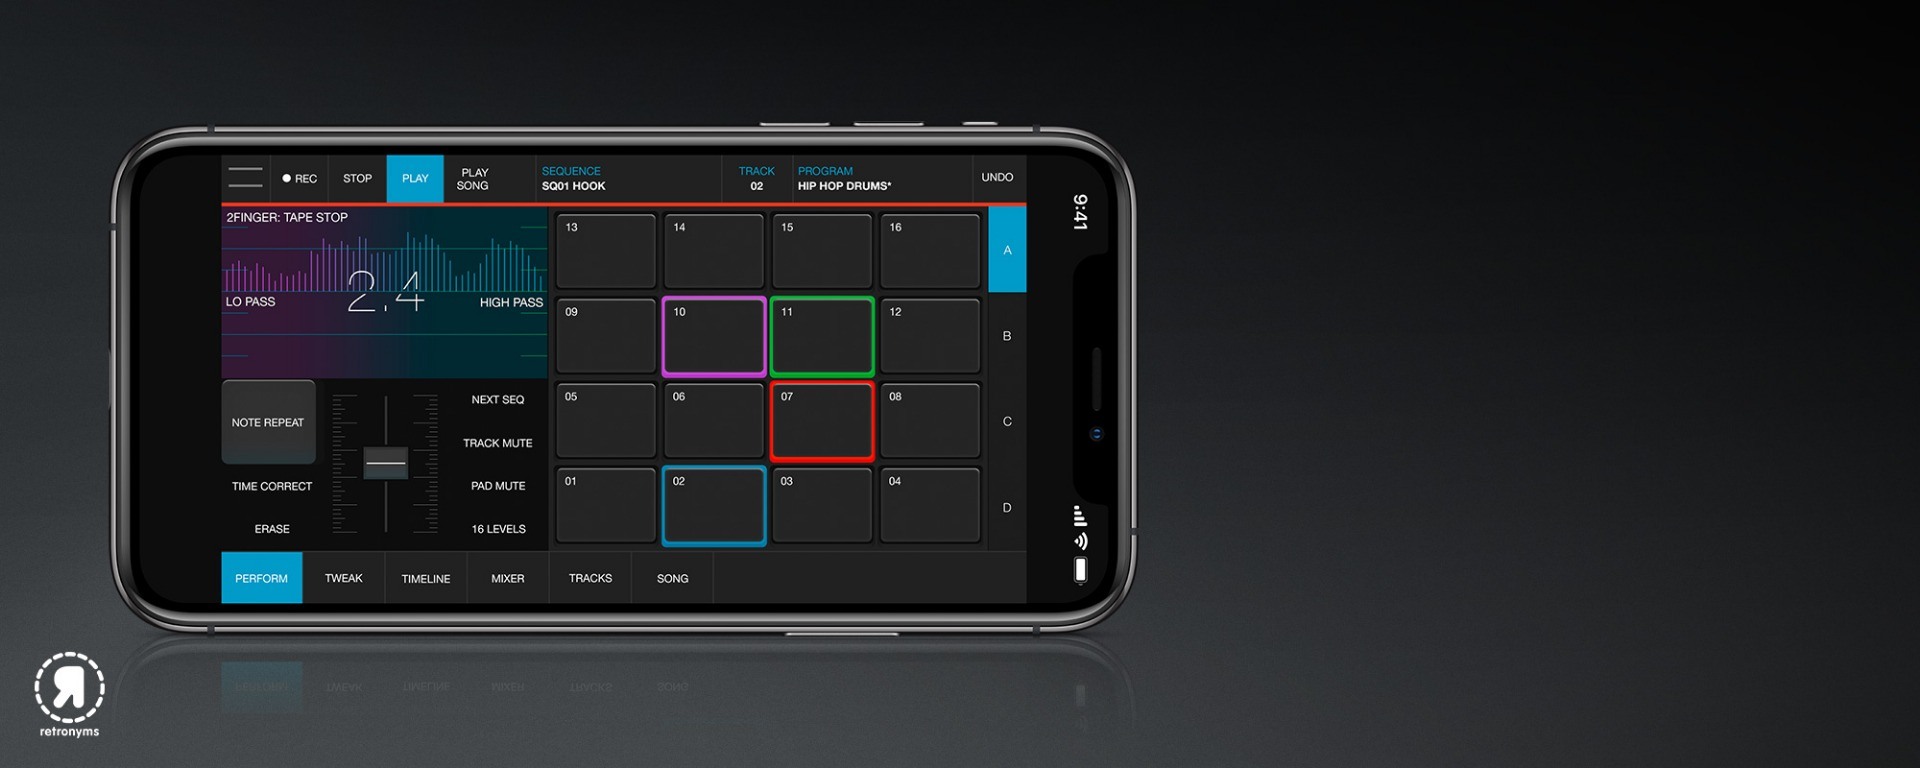 Free Sampler/Sequencer For iOS